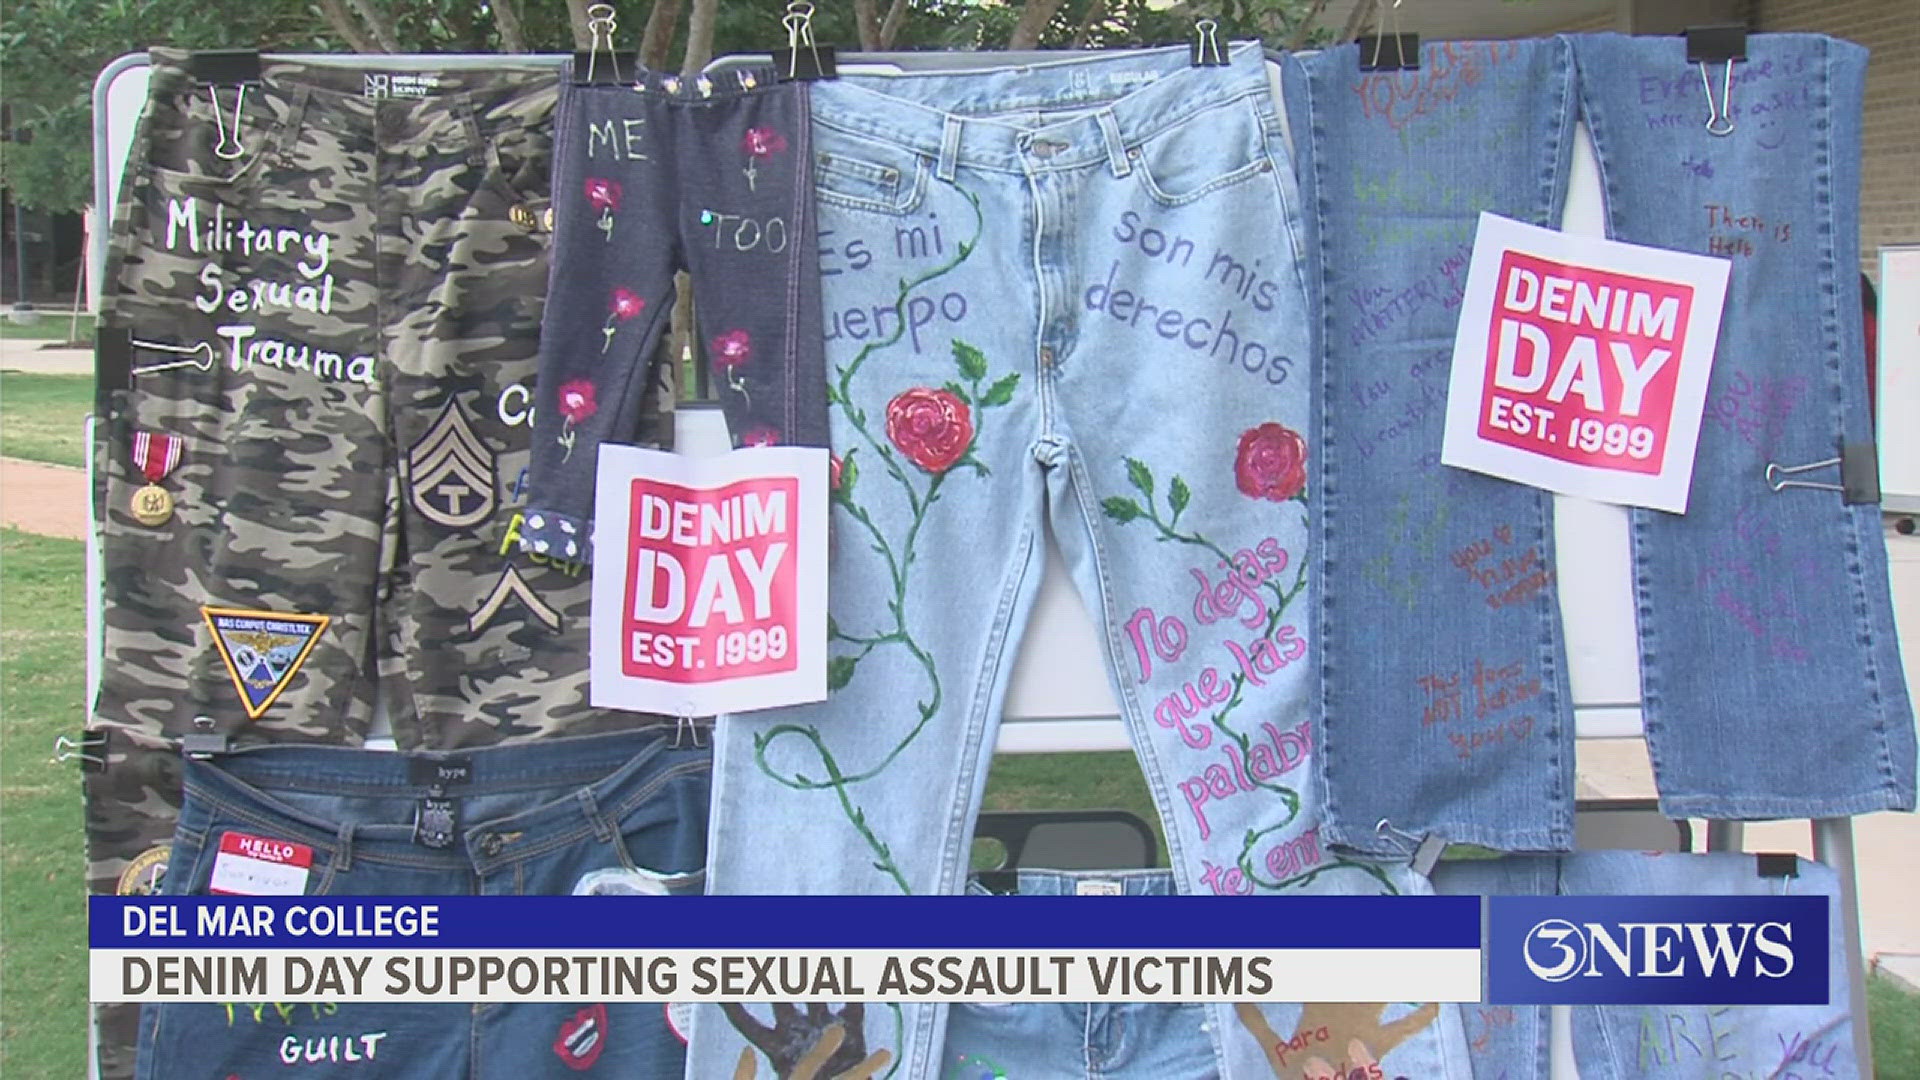 The denim movement started in the 1990s to bring awareness to the threat of sexual assault.